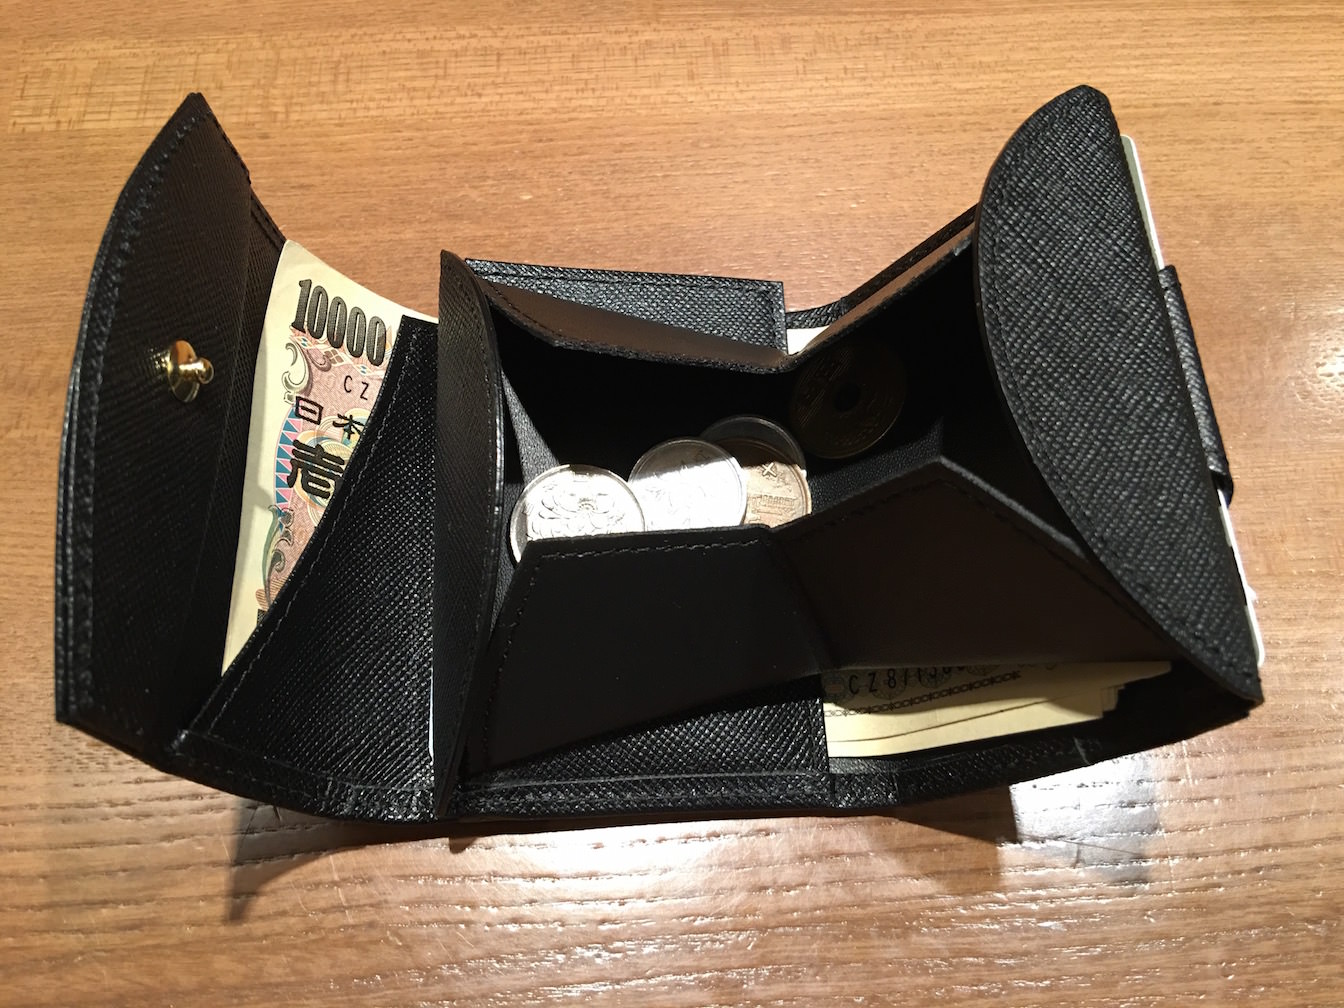 Hammock wallet compact first impression 9